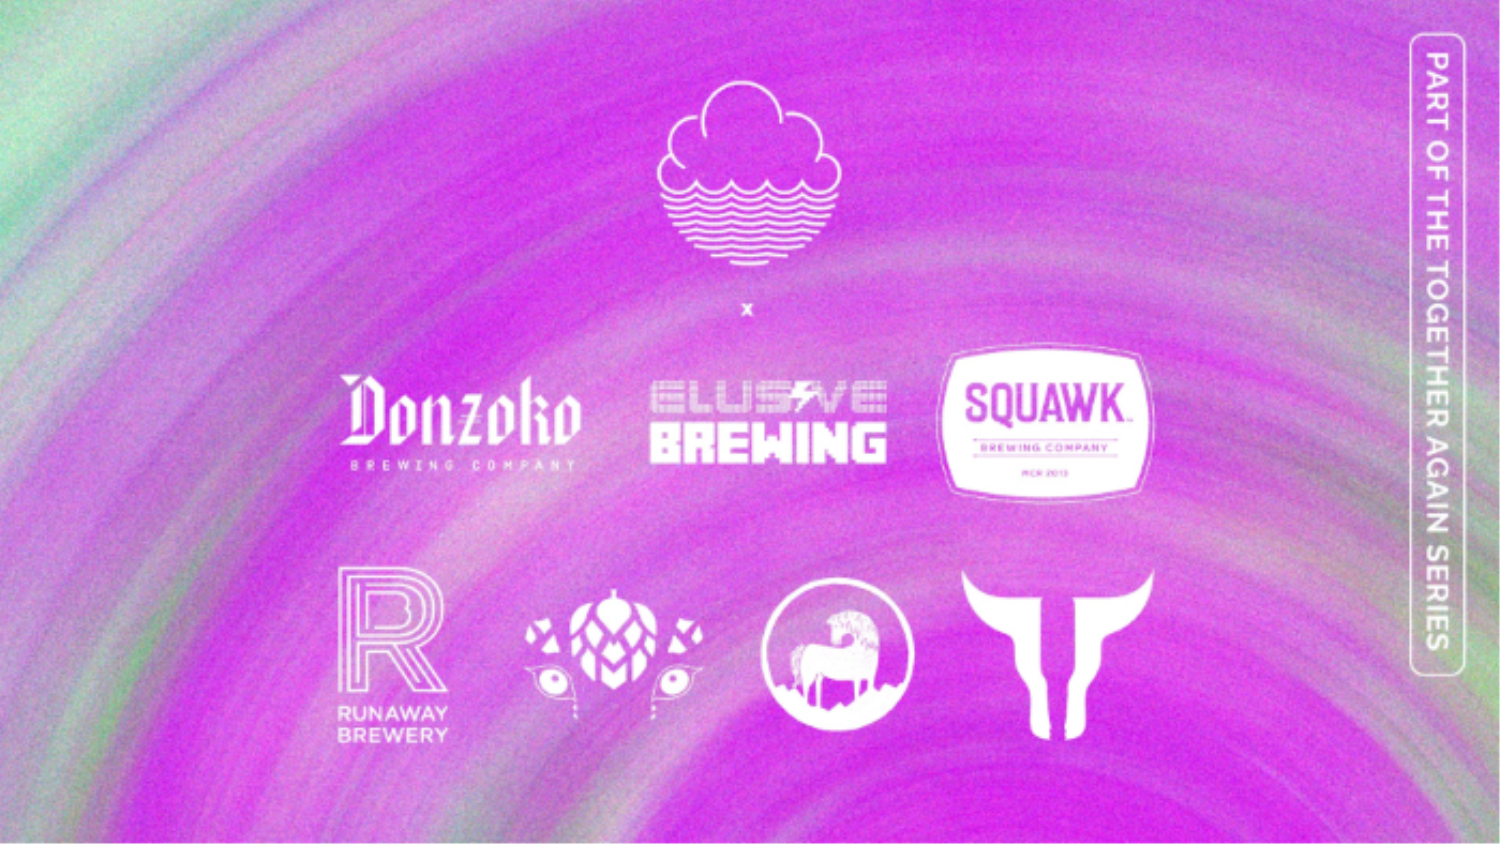 Cloudwater Together Again